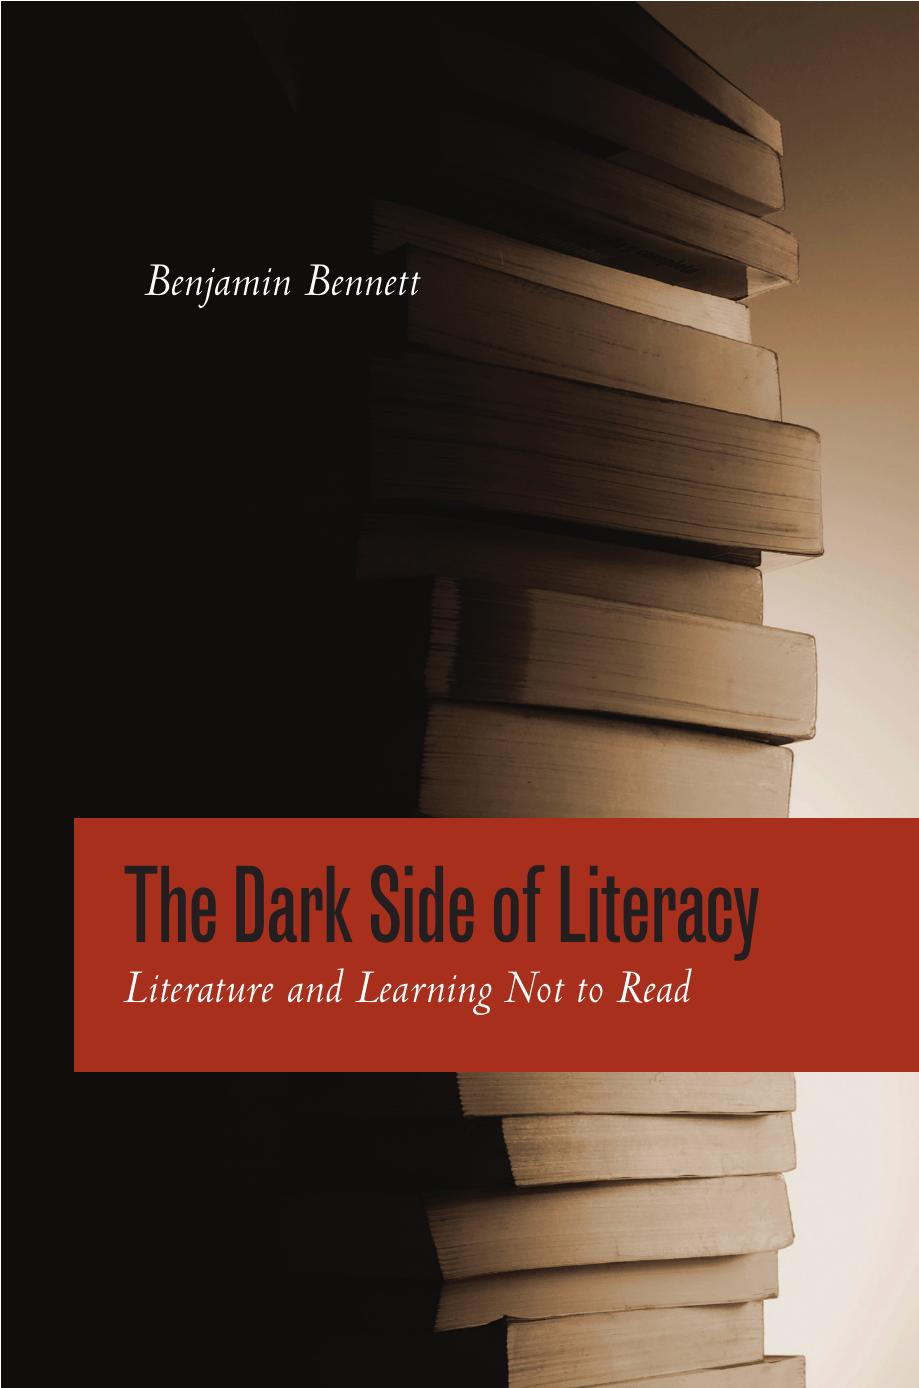 The Dark Side of Literacy : Literature and Learning Not to Read by Benjamin Bennett